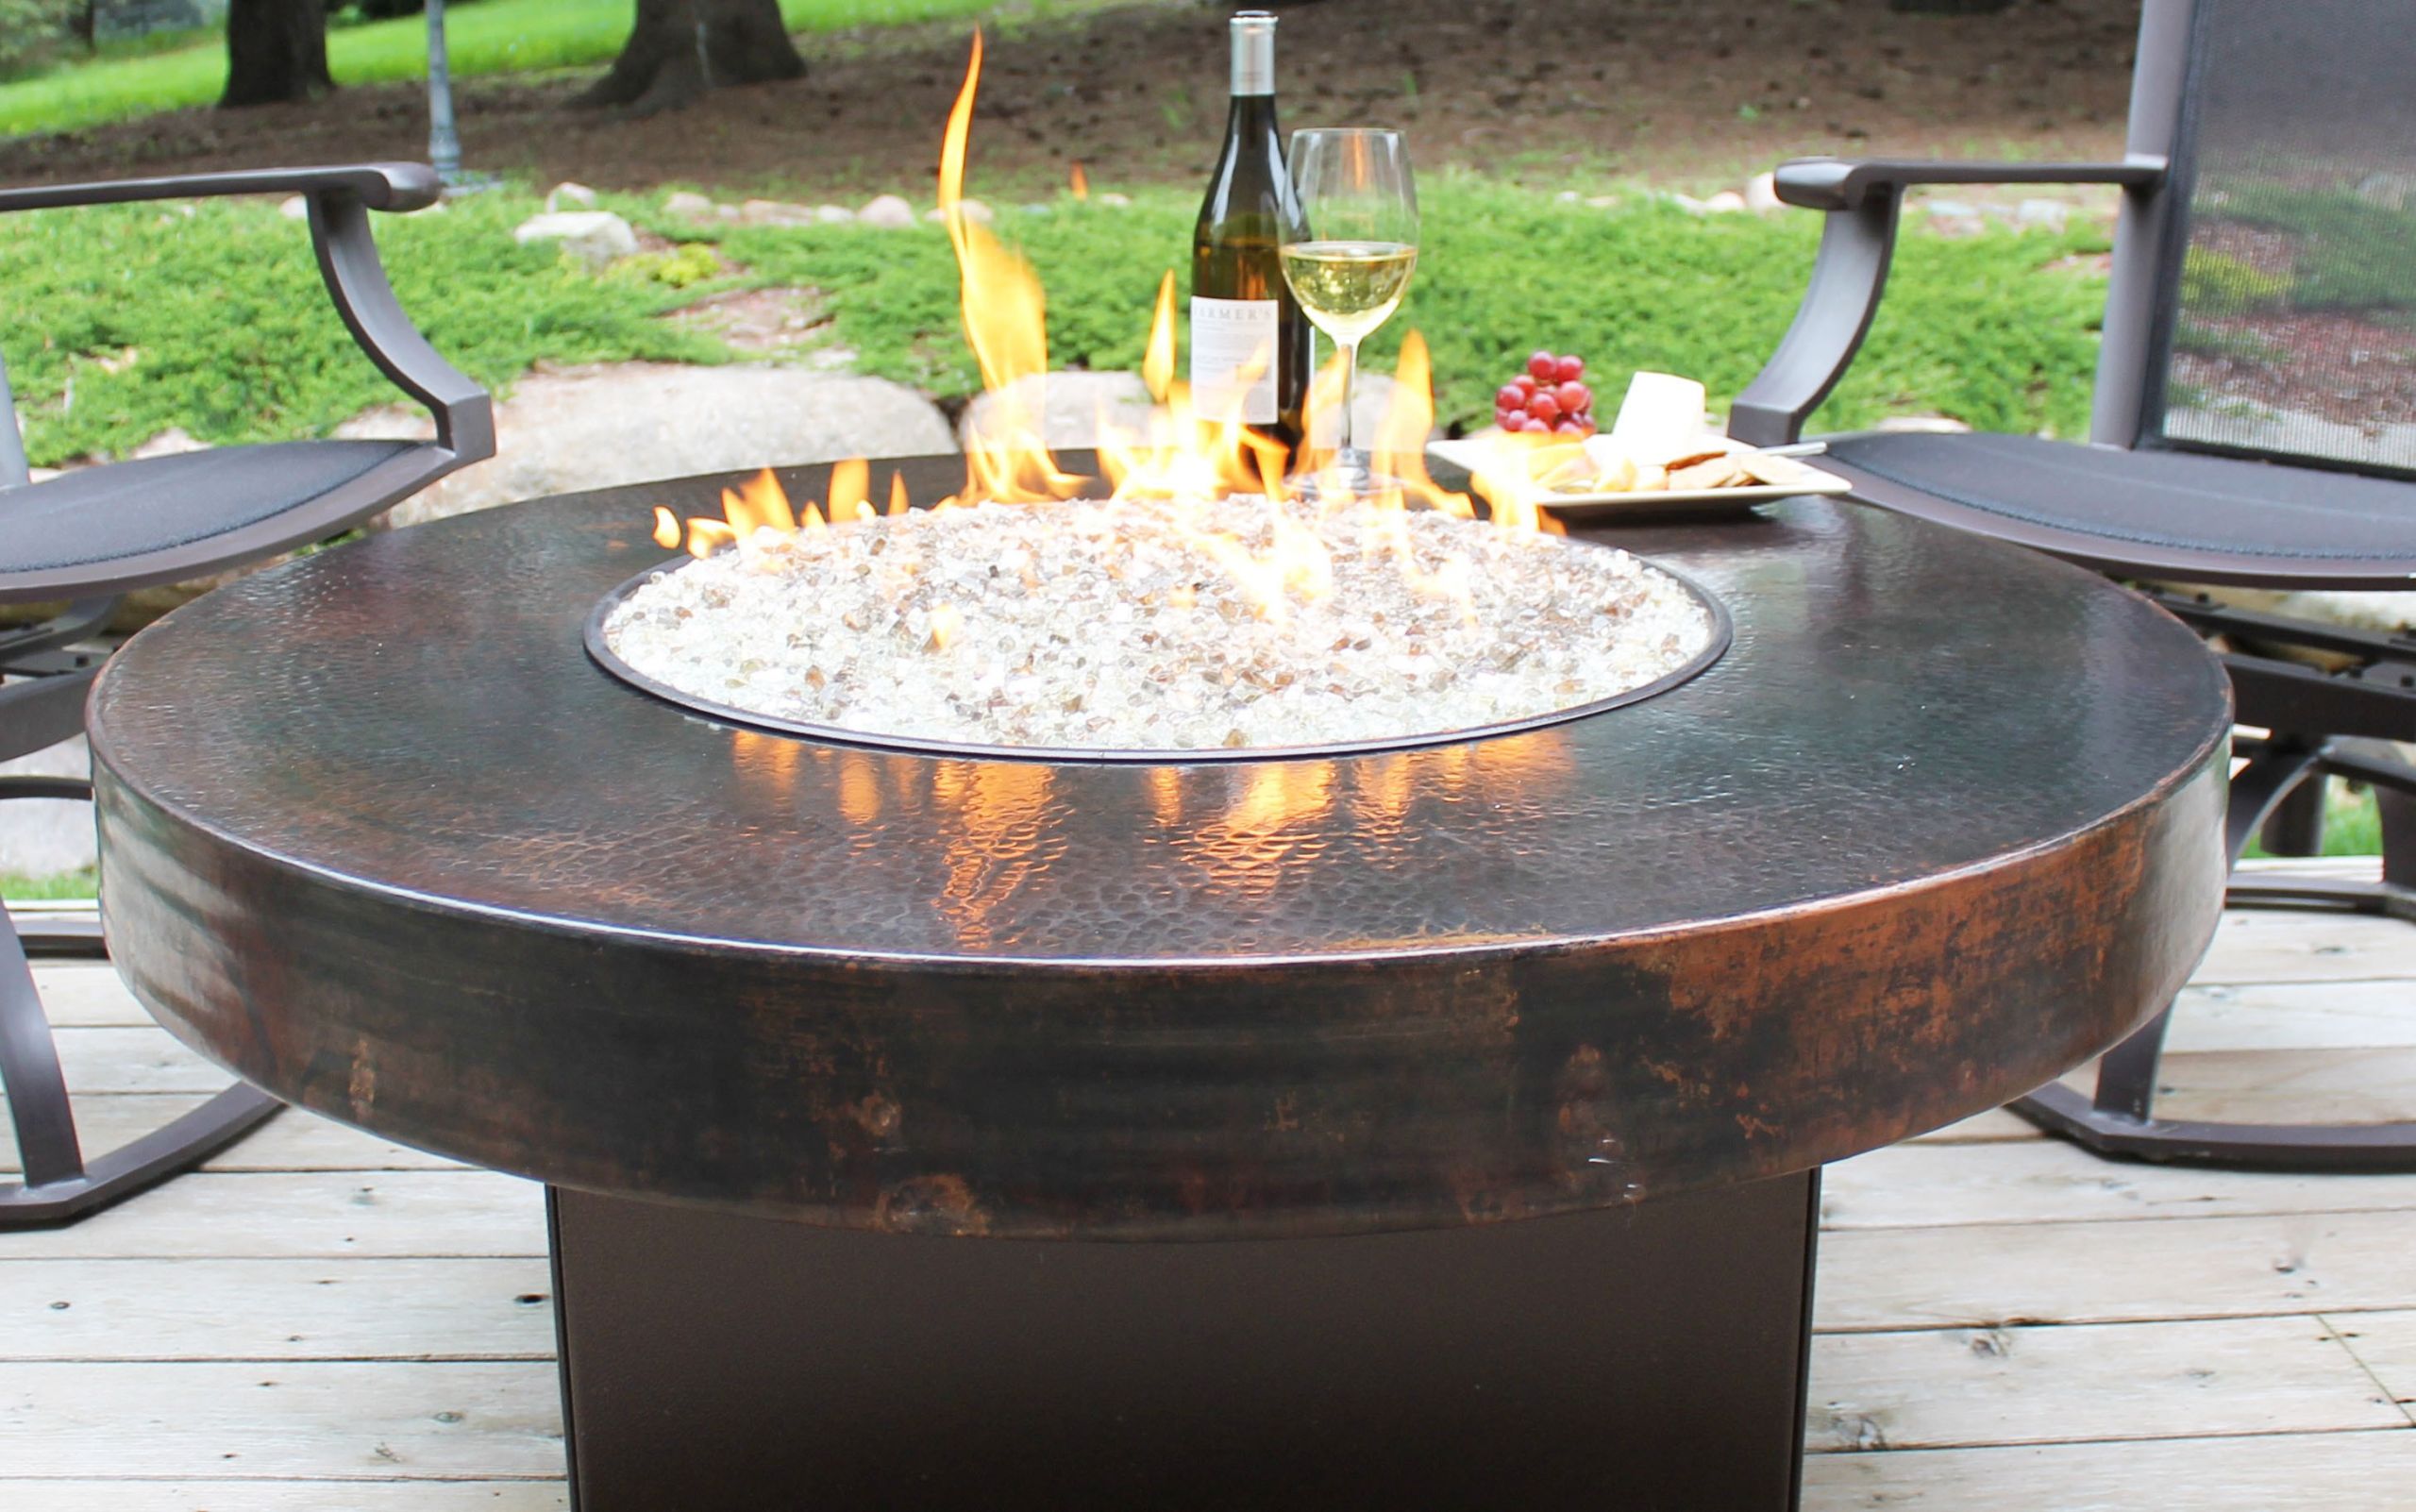 DIY Fire Pit Kits
 How to Make Tabletop Fire Pit Kit DIY